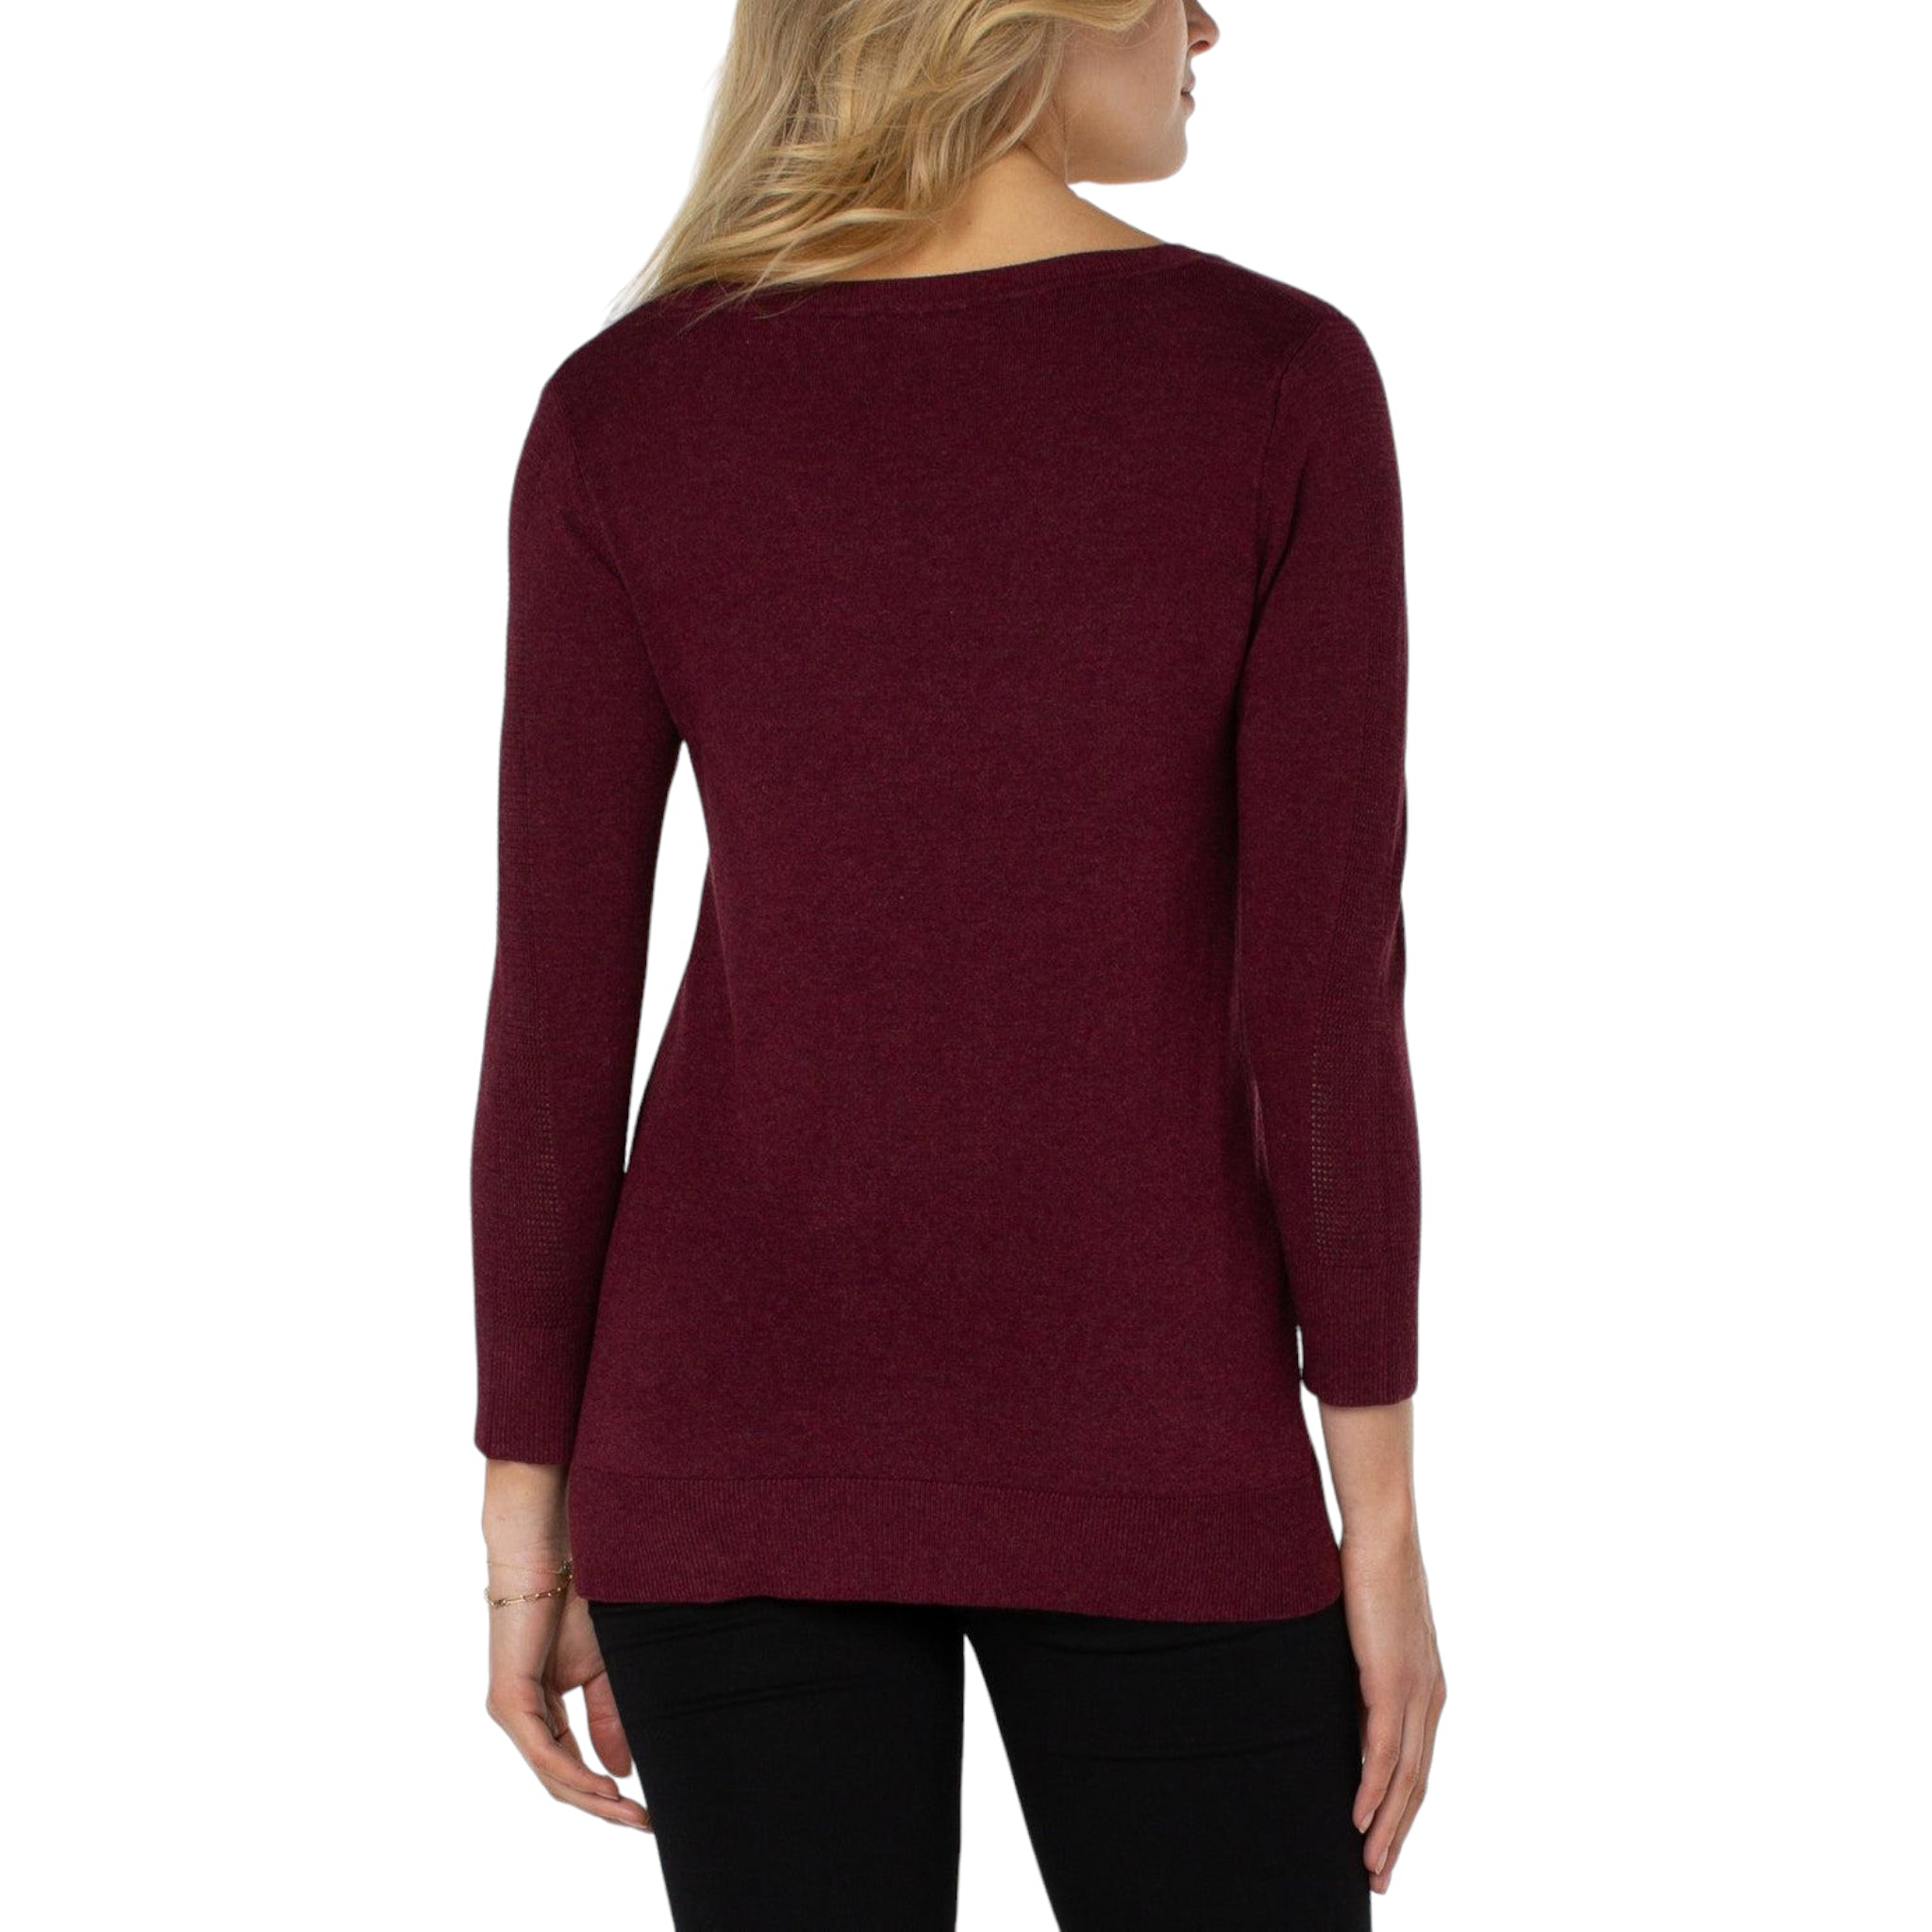 Sweater - Mulberry Heather V-Neck Sweater